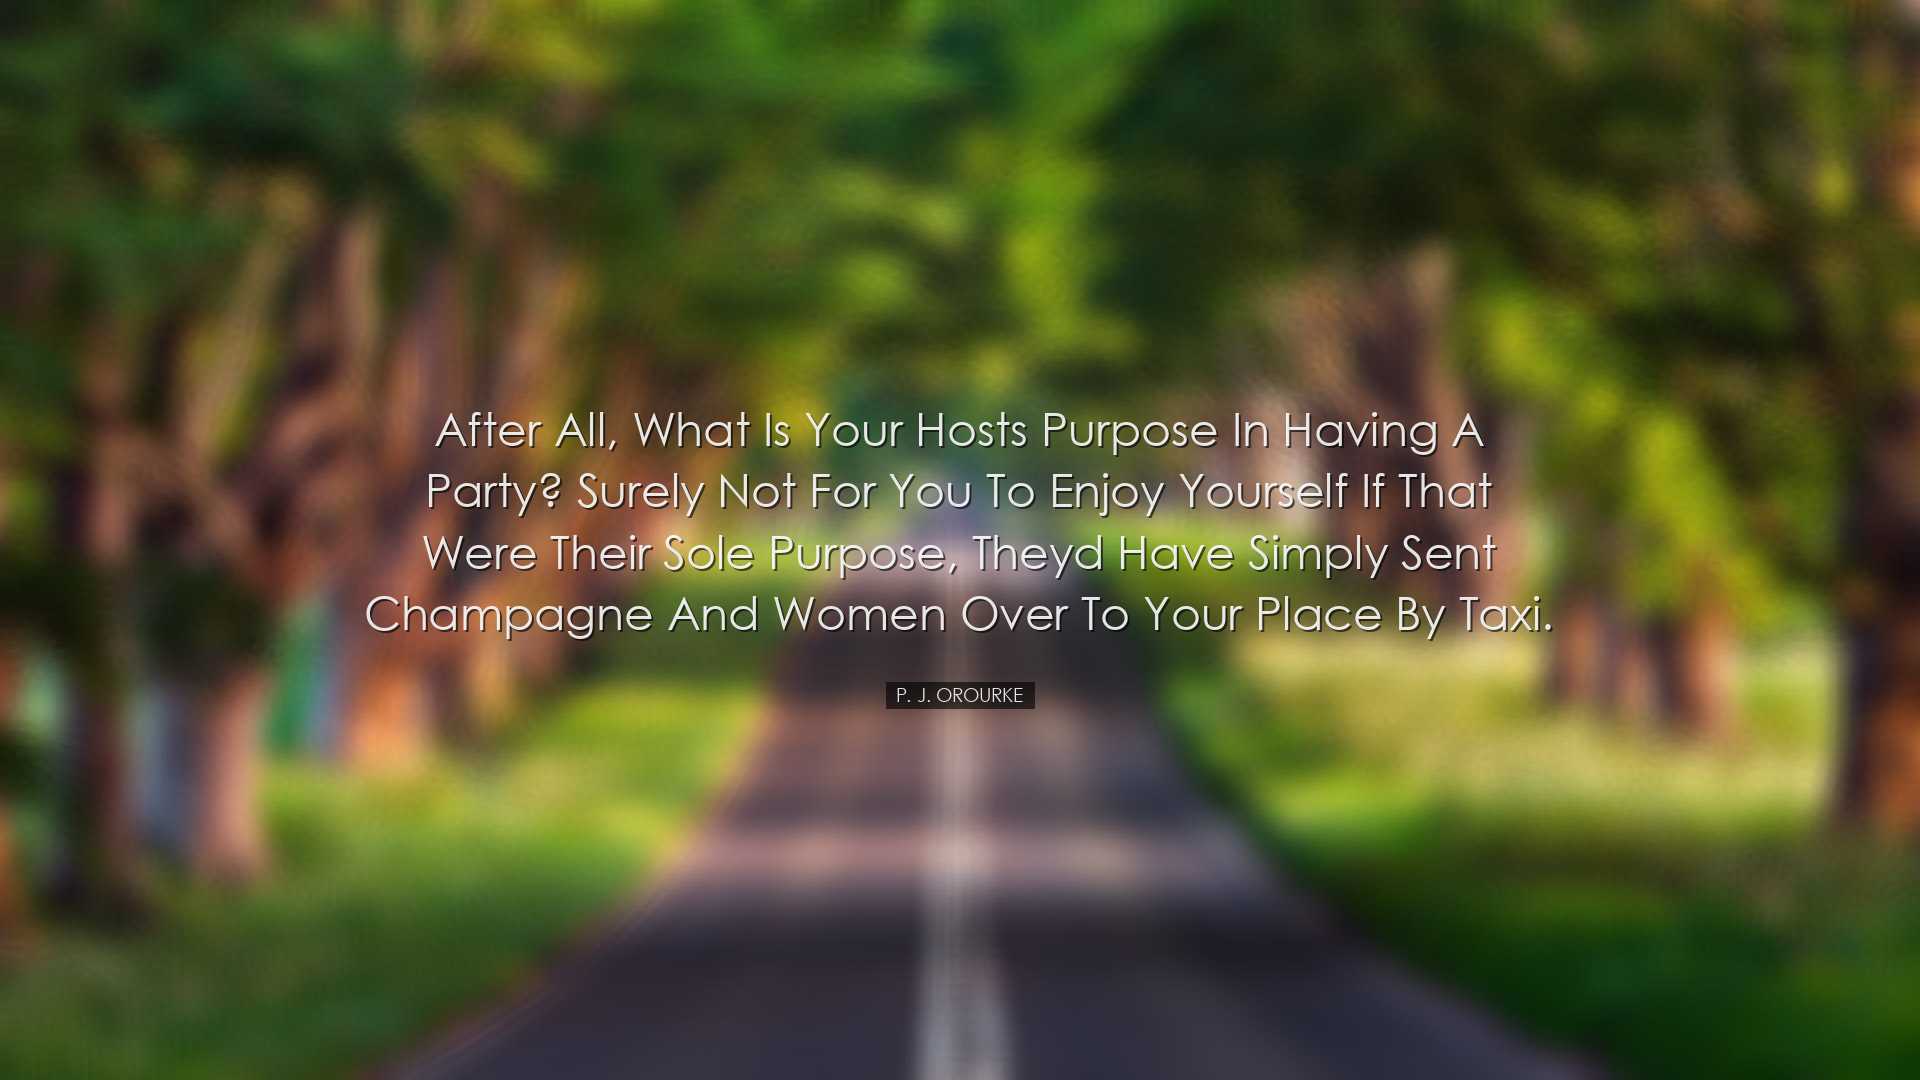 After all, what is your hosts purpose in having a party? Surely no